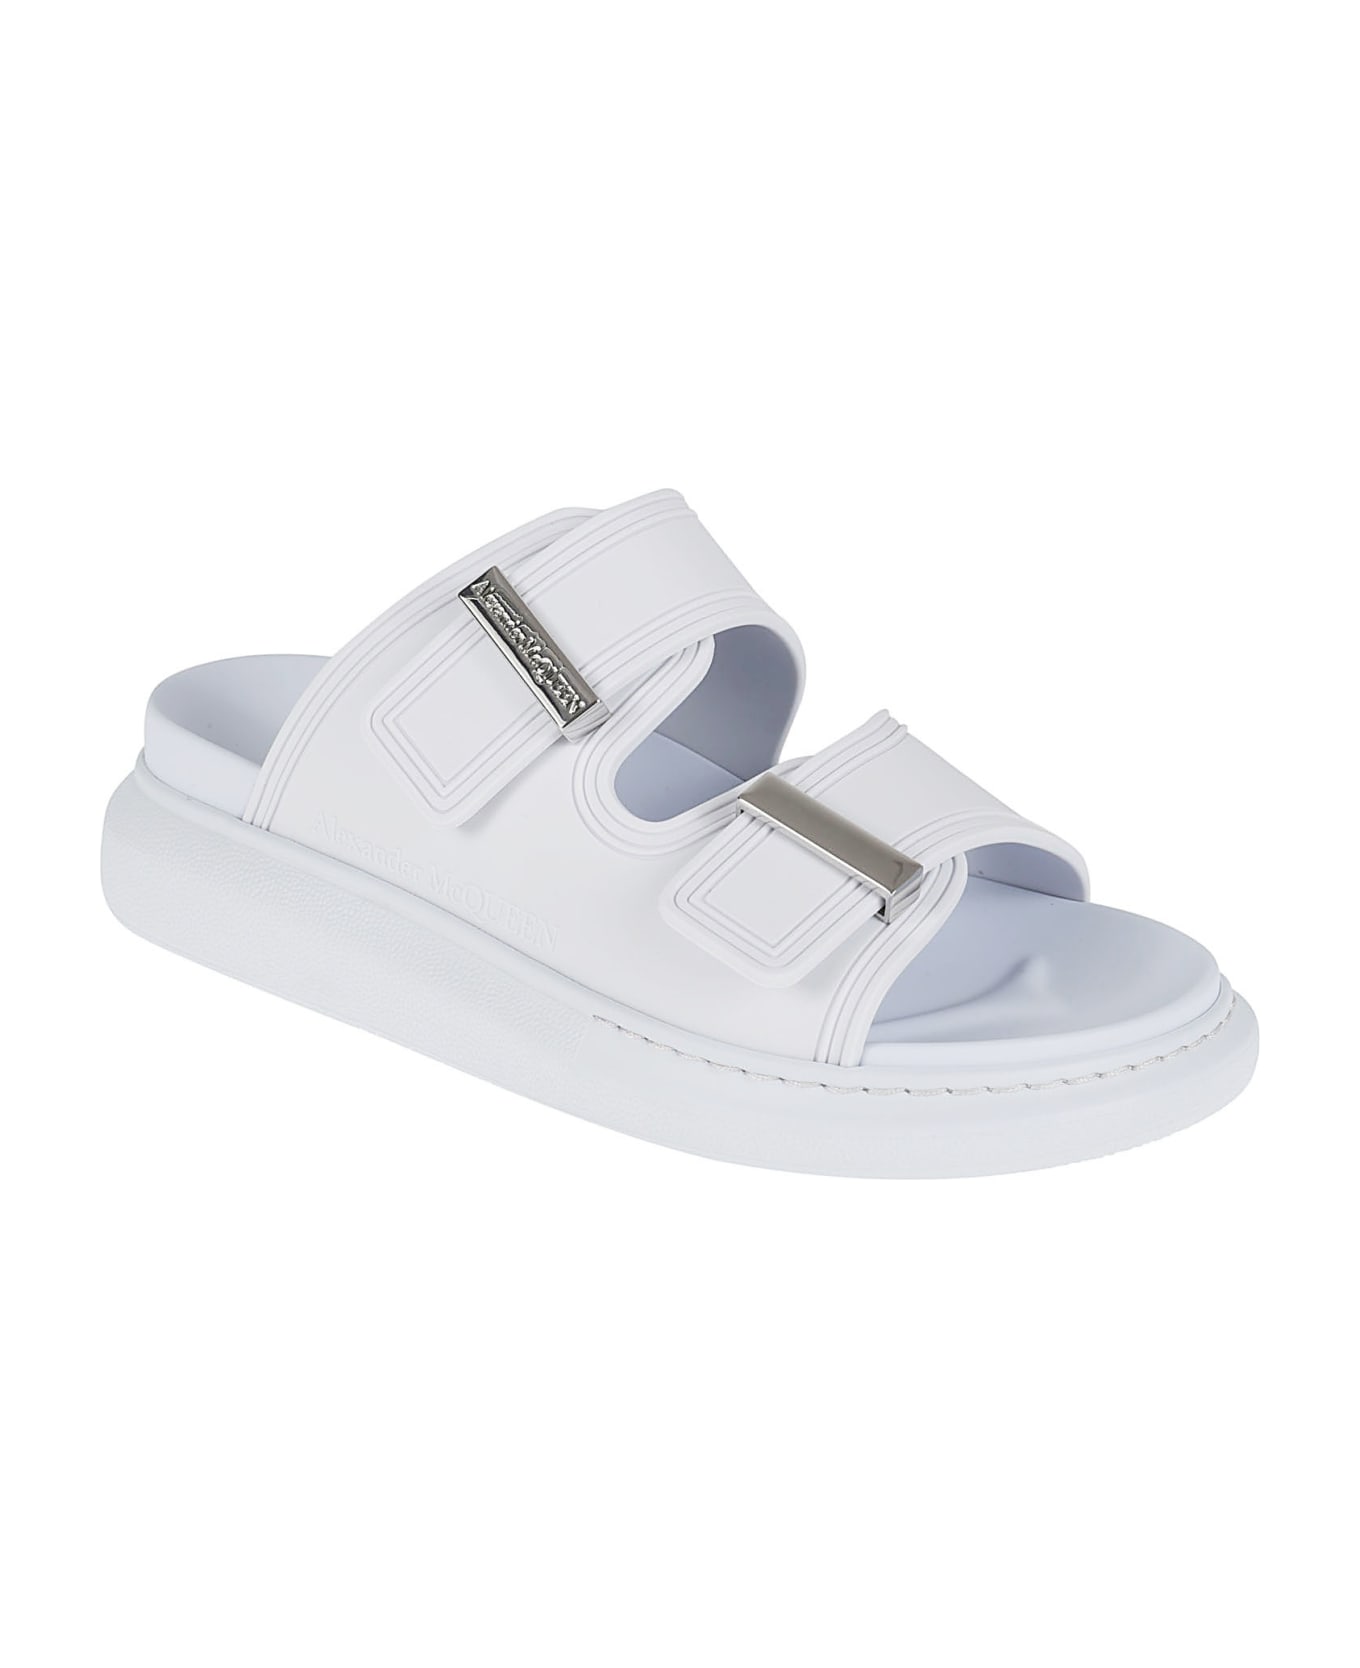 Alexander McQueen Logo Detailed Buckle Strap Sliders - Pale Lilac/Silver